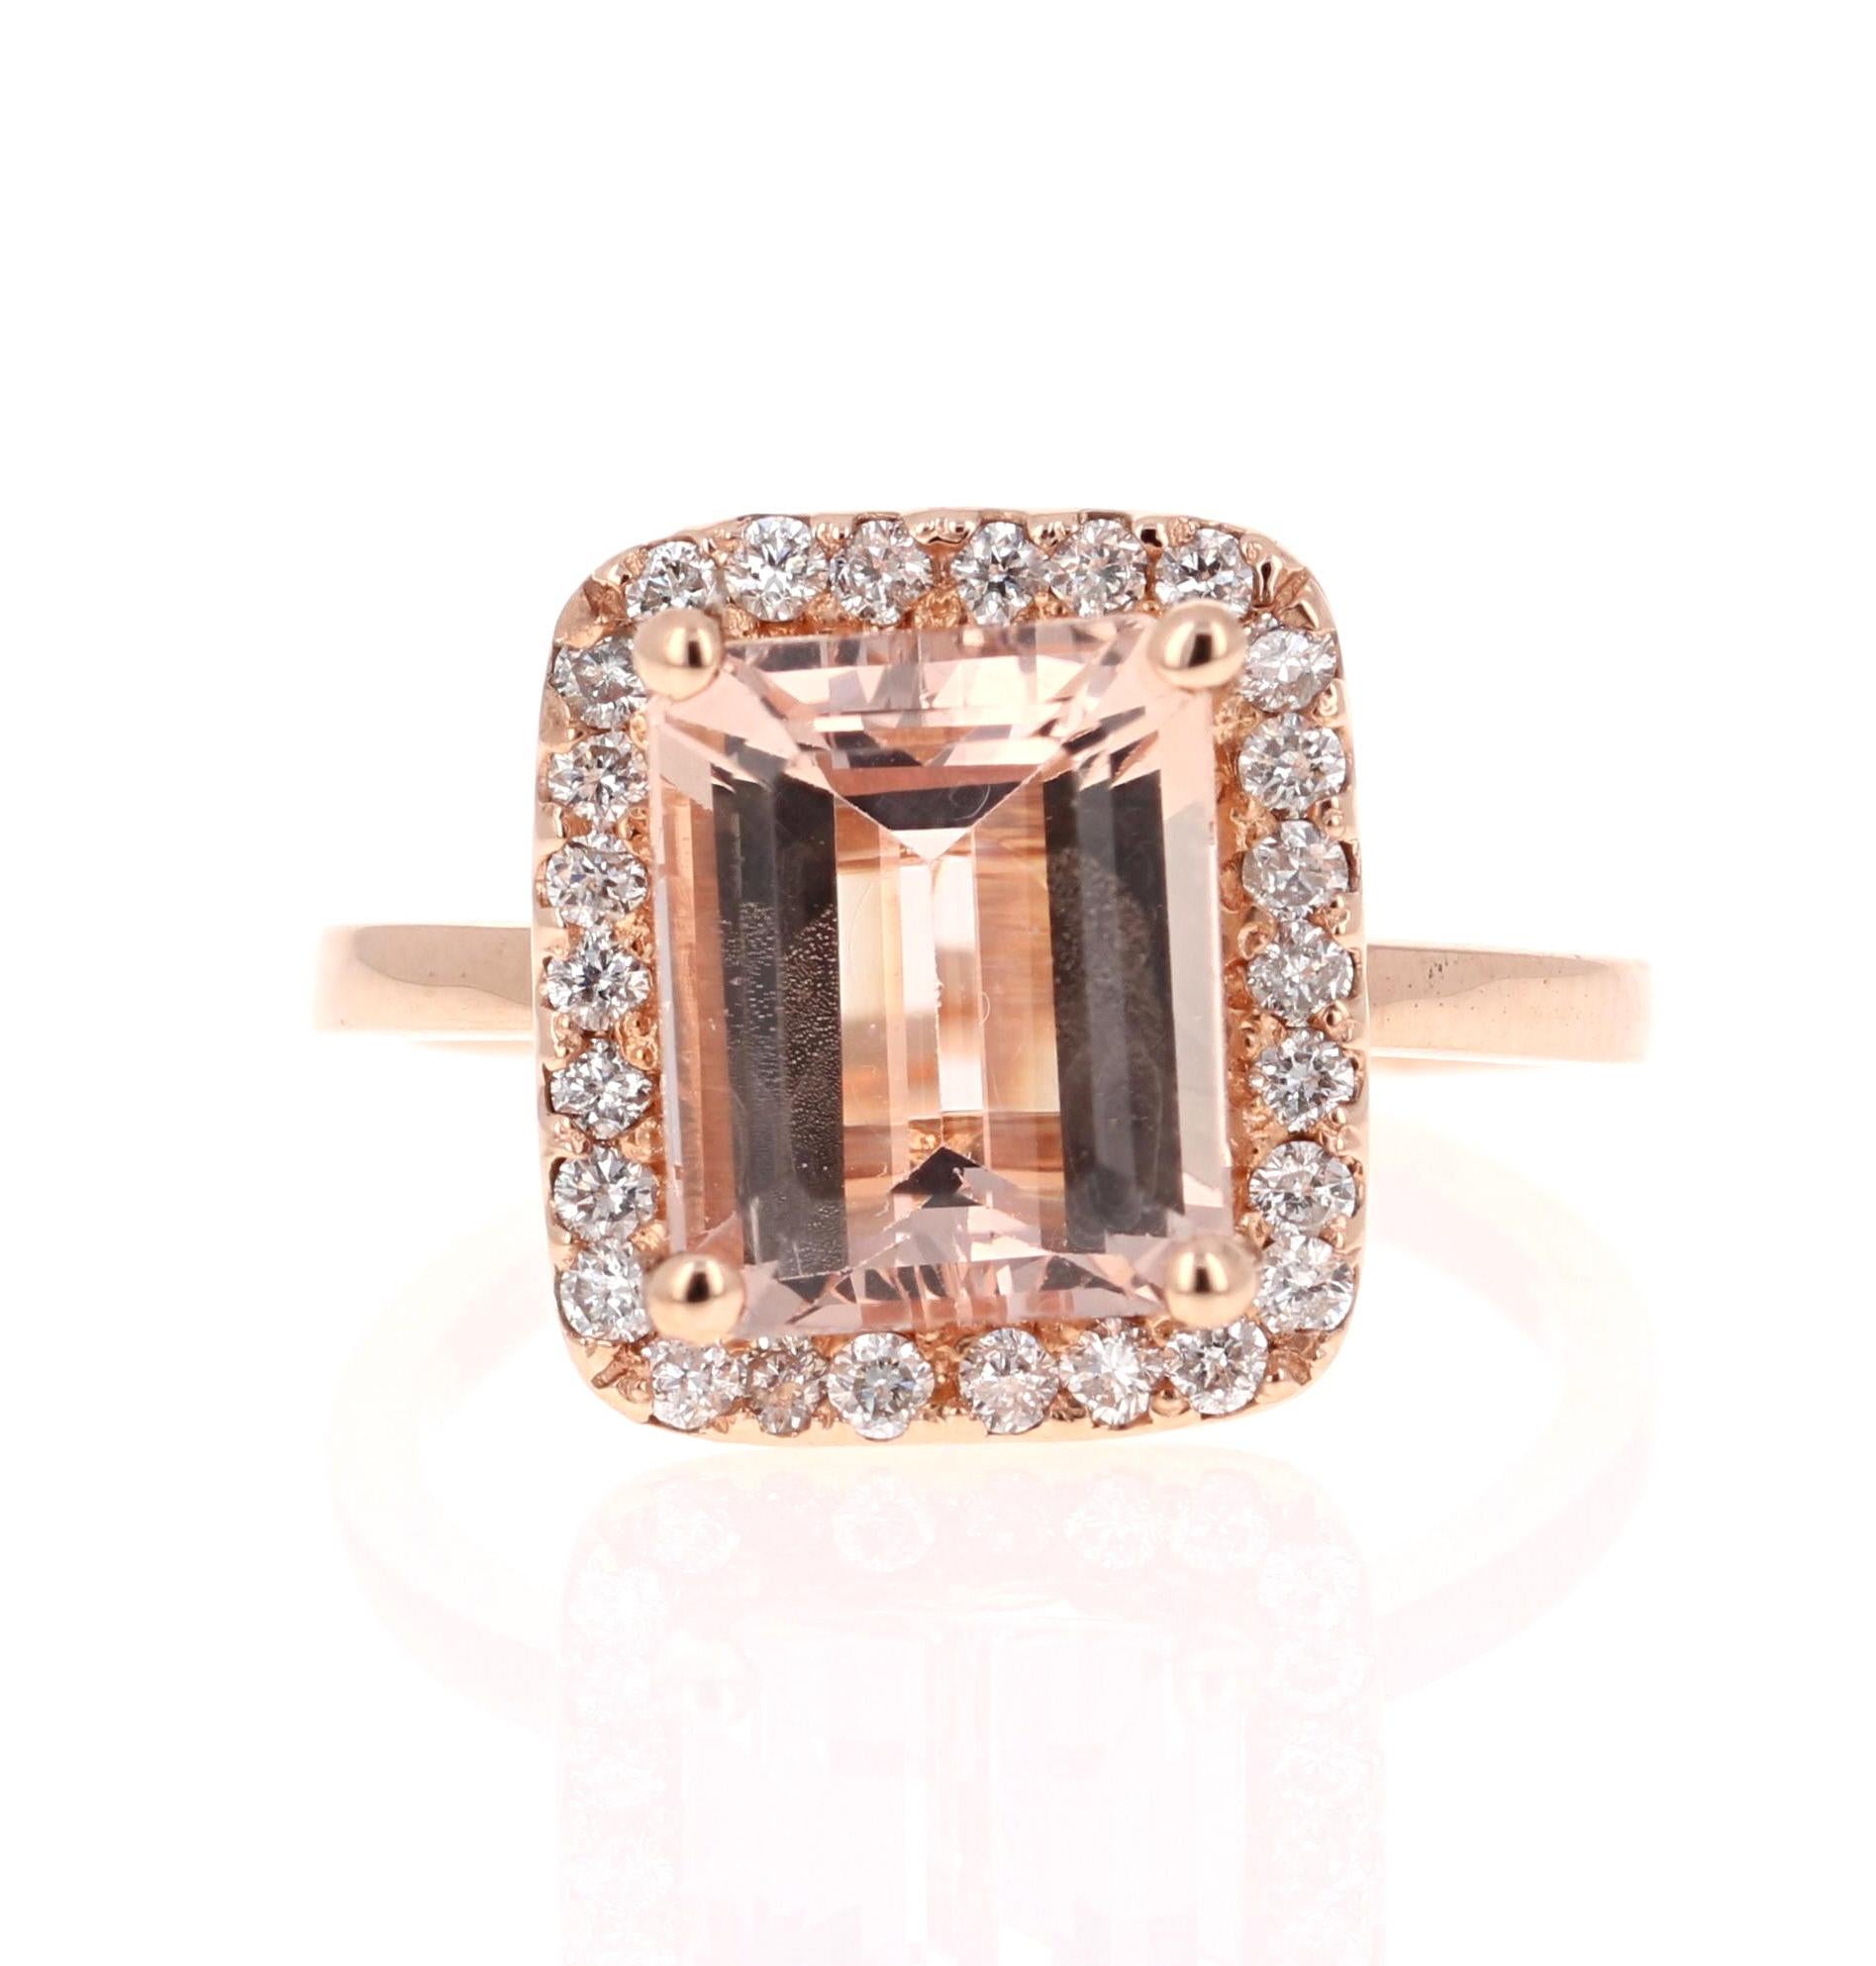 Statement Morganite Diamond Ring! 

This ring has a 3.51 Carat Emerald Cut Morganite and is surrounded by 26 Round Cut Diamonds that weigh 0.42 Carats. The total carat weight of the ring is 3.93 Carats.  

The Morganite is 12 mm x 10 mm and is